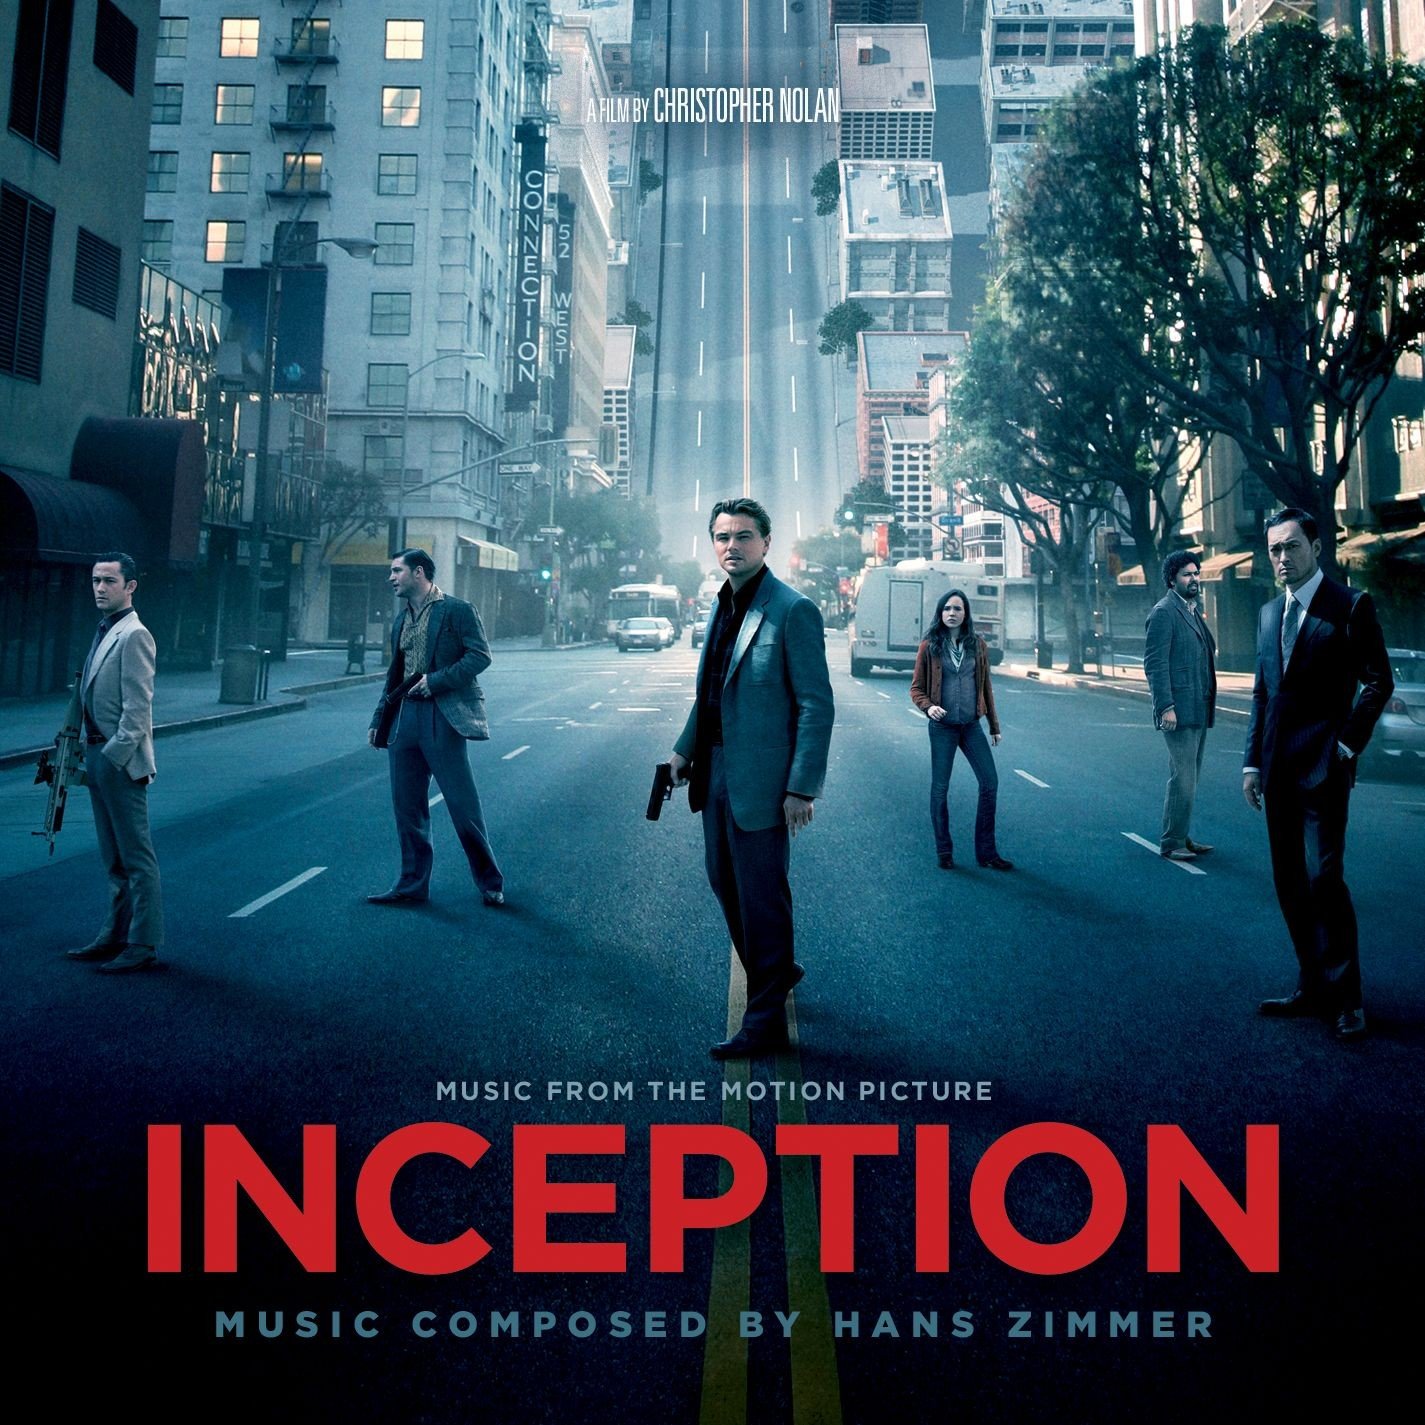 Hans Zimmer-Inception Music From The Motion Picture-OST-CD-FLAC-2010-FORSAKEN